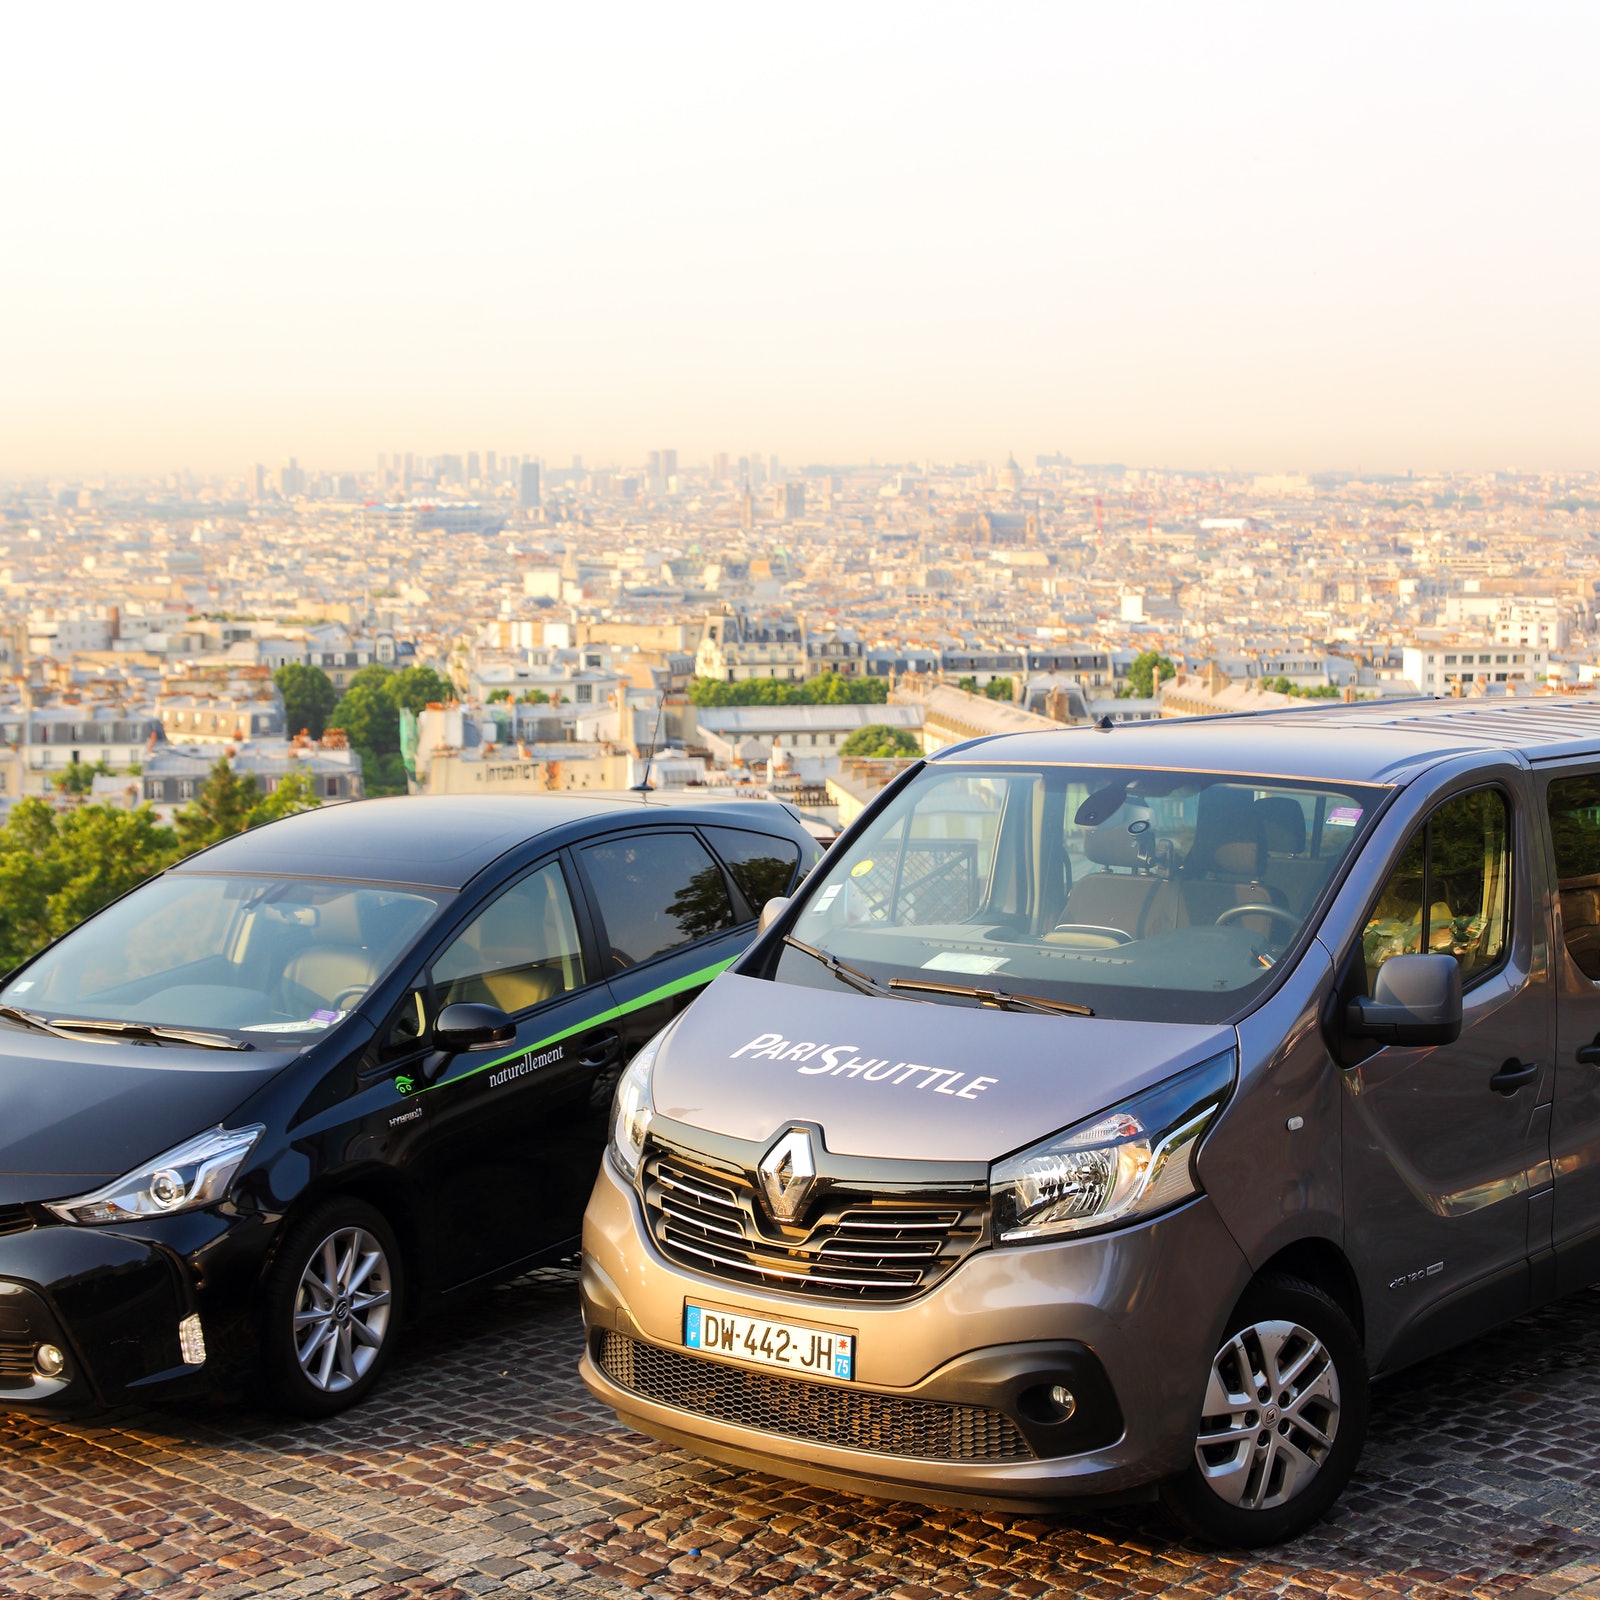 CDG Airport: Shuttle Transfer To/From Accommodation in Paris in France